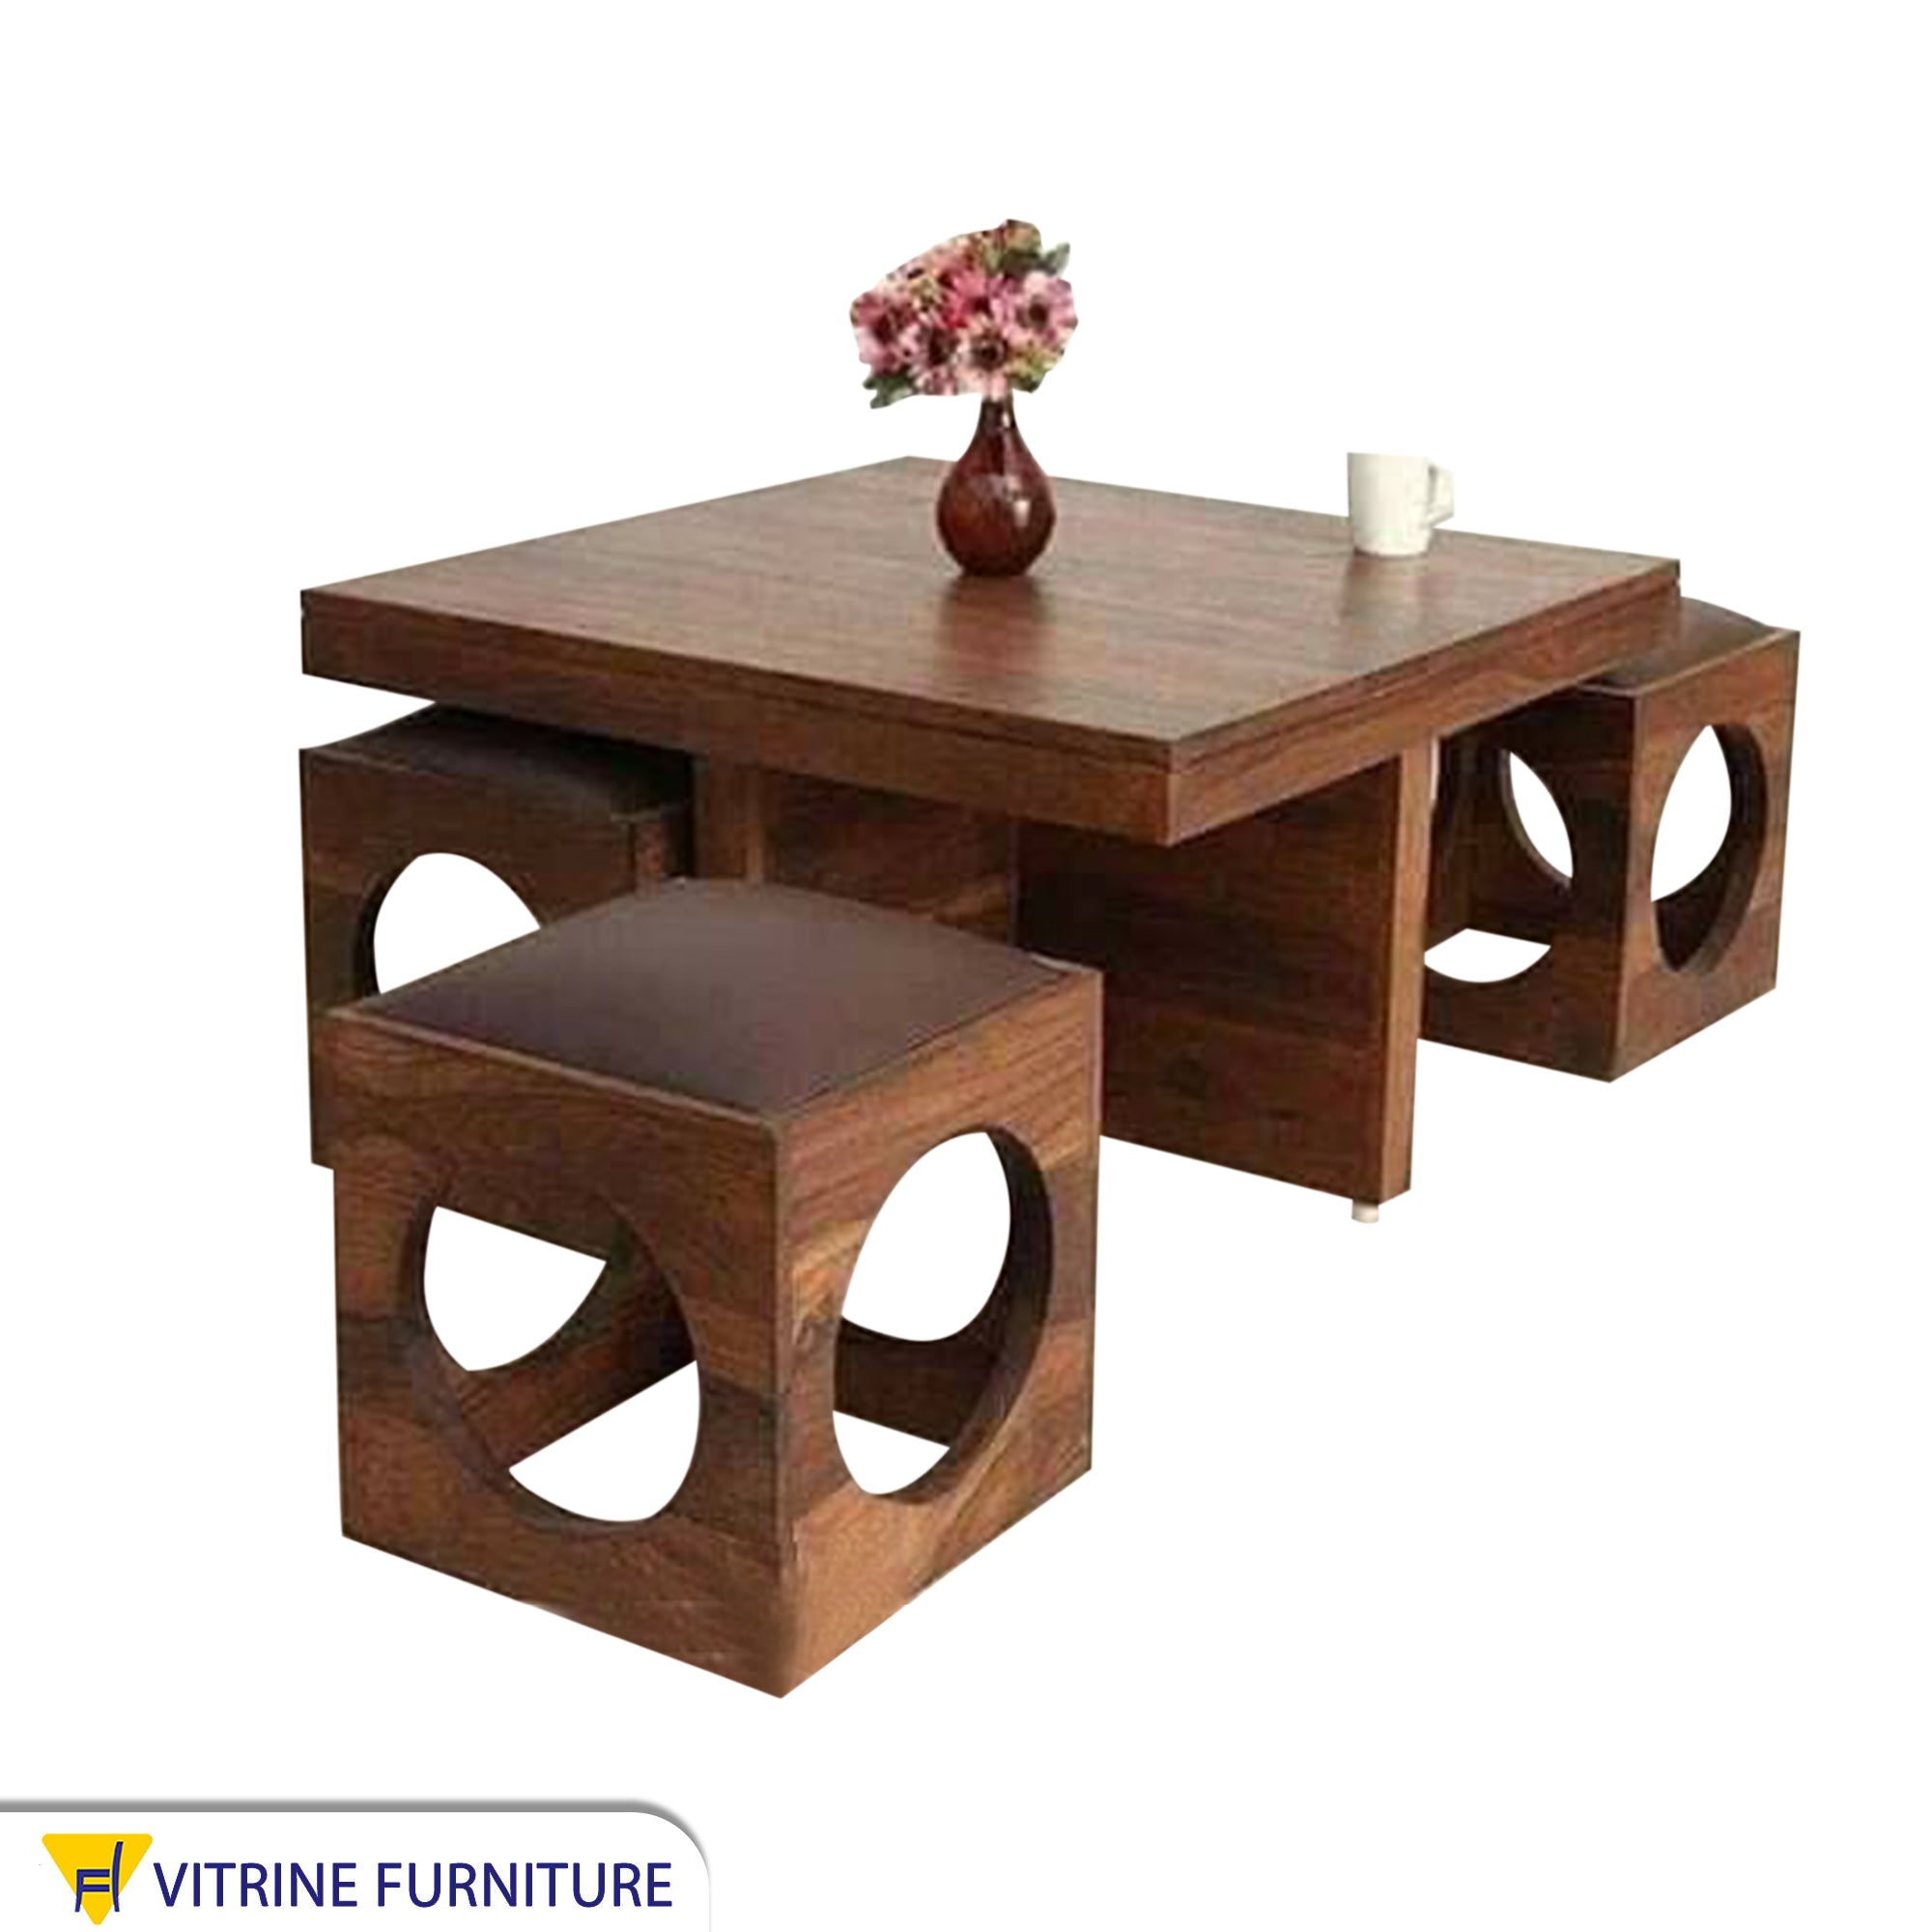 Large center table with four rolls